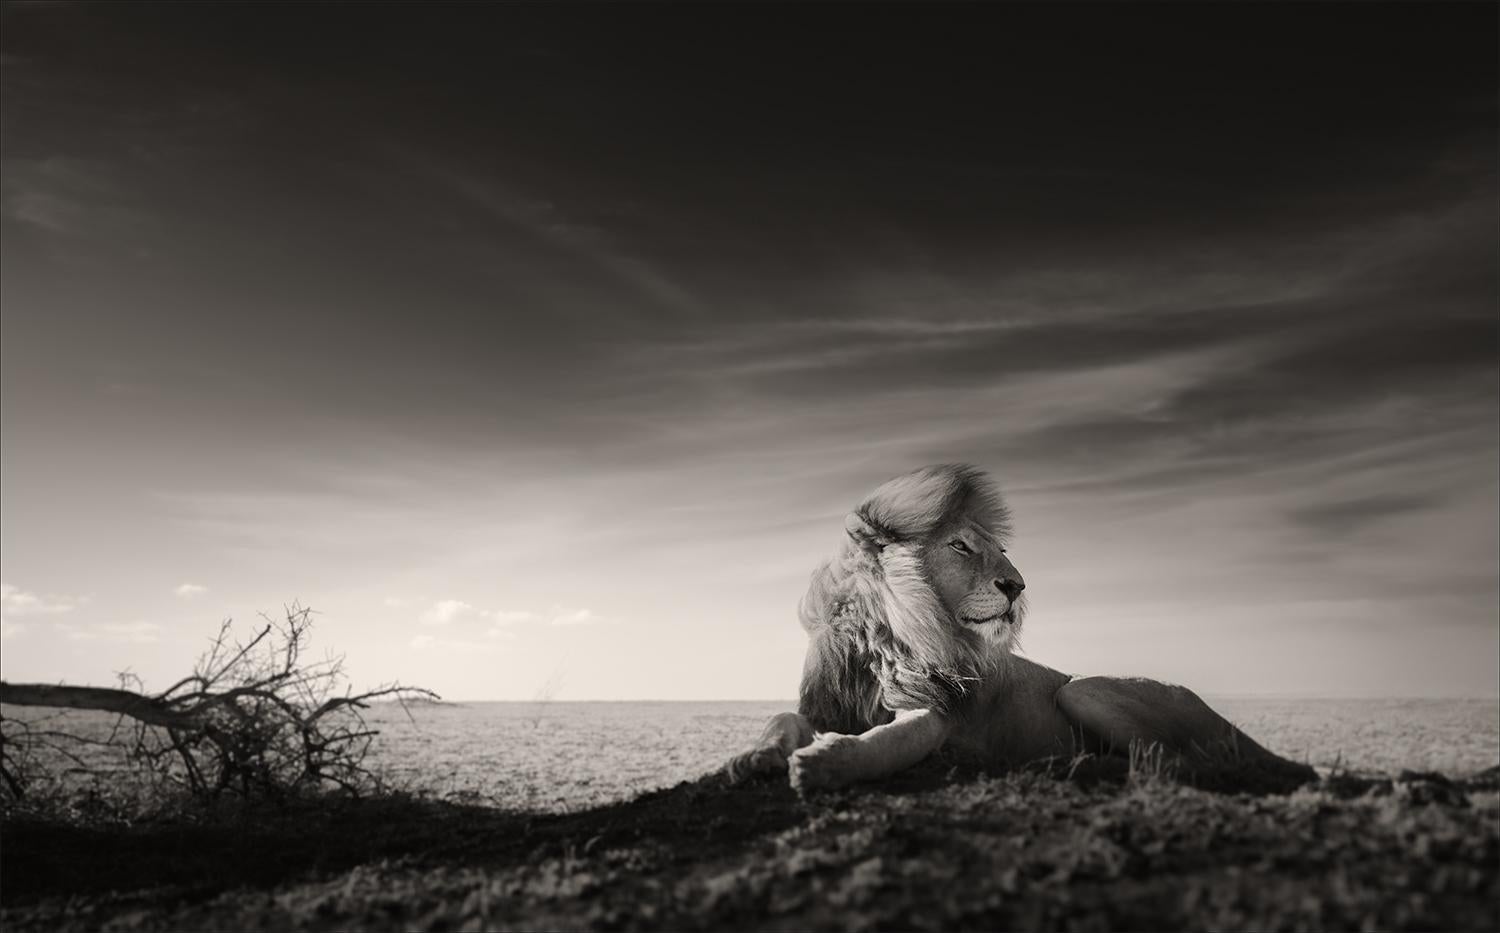 Joachim Schmeisser Portrait Photograph - A King's time, animal, wildlife, black and white photography, Lion